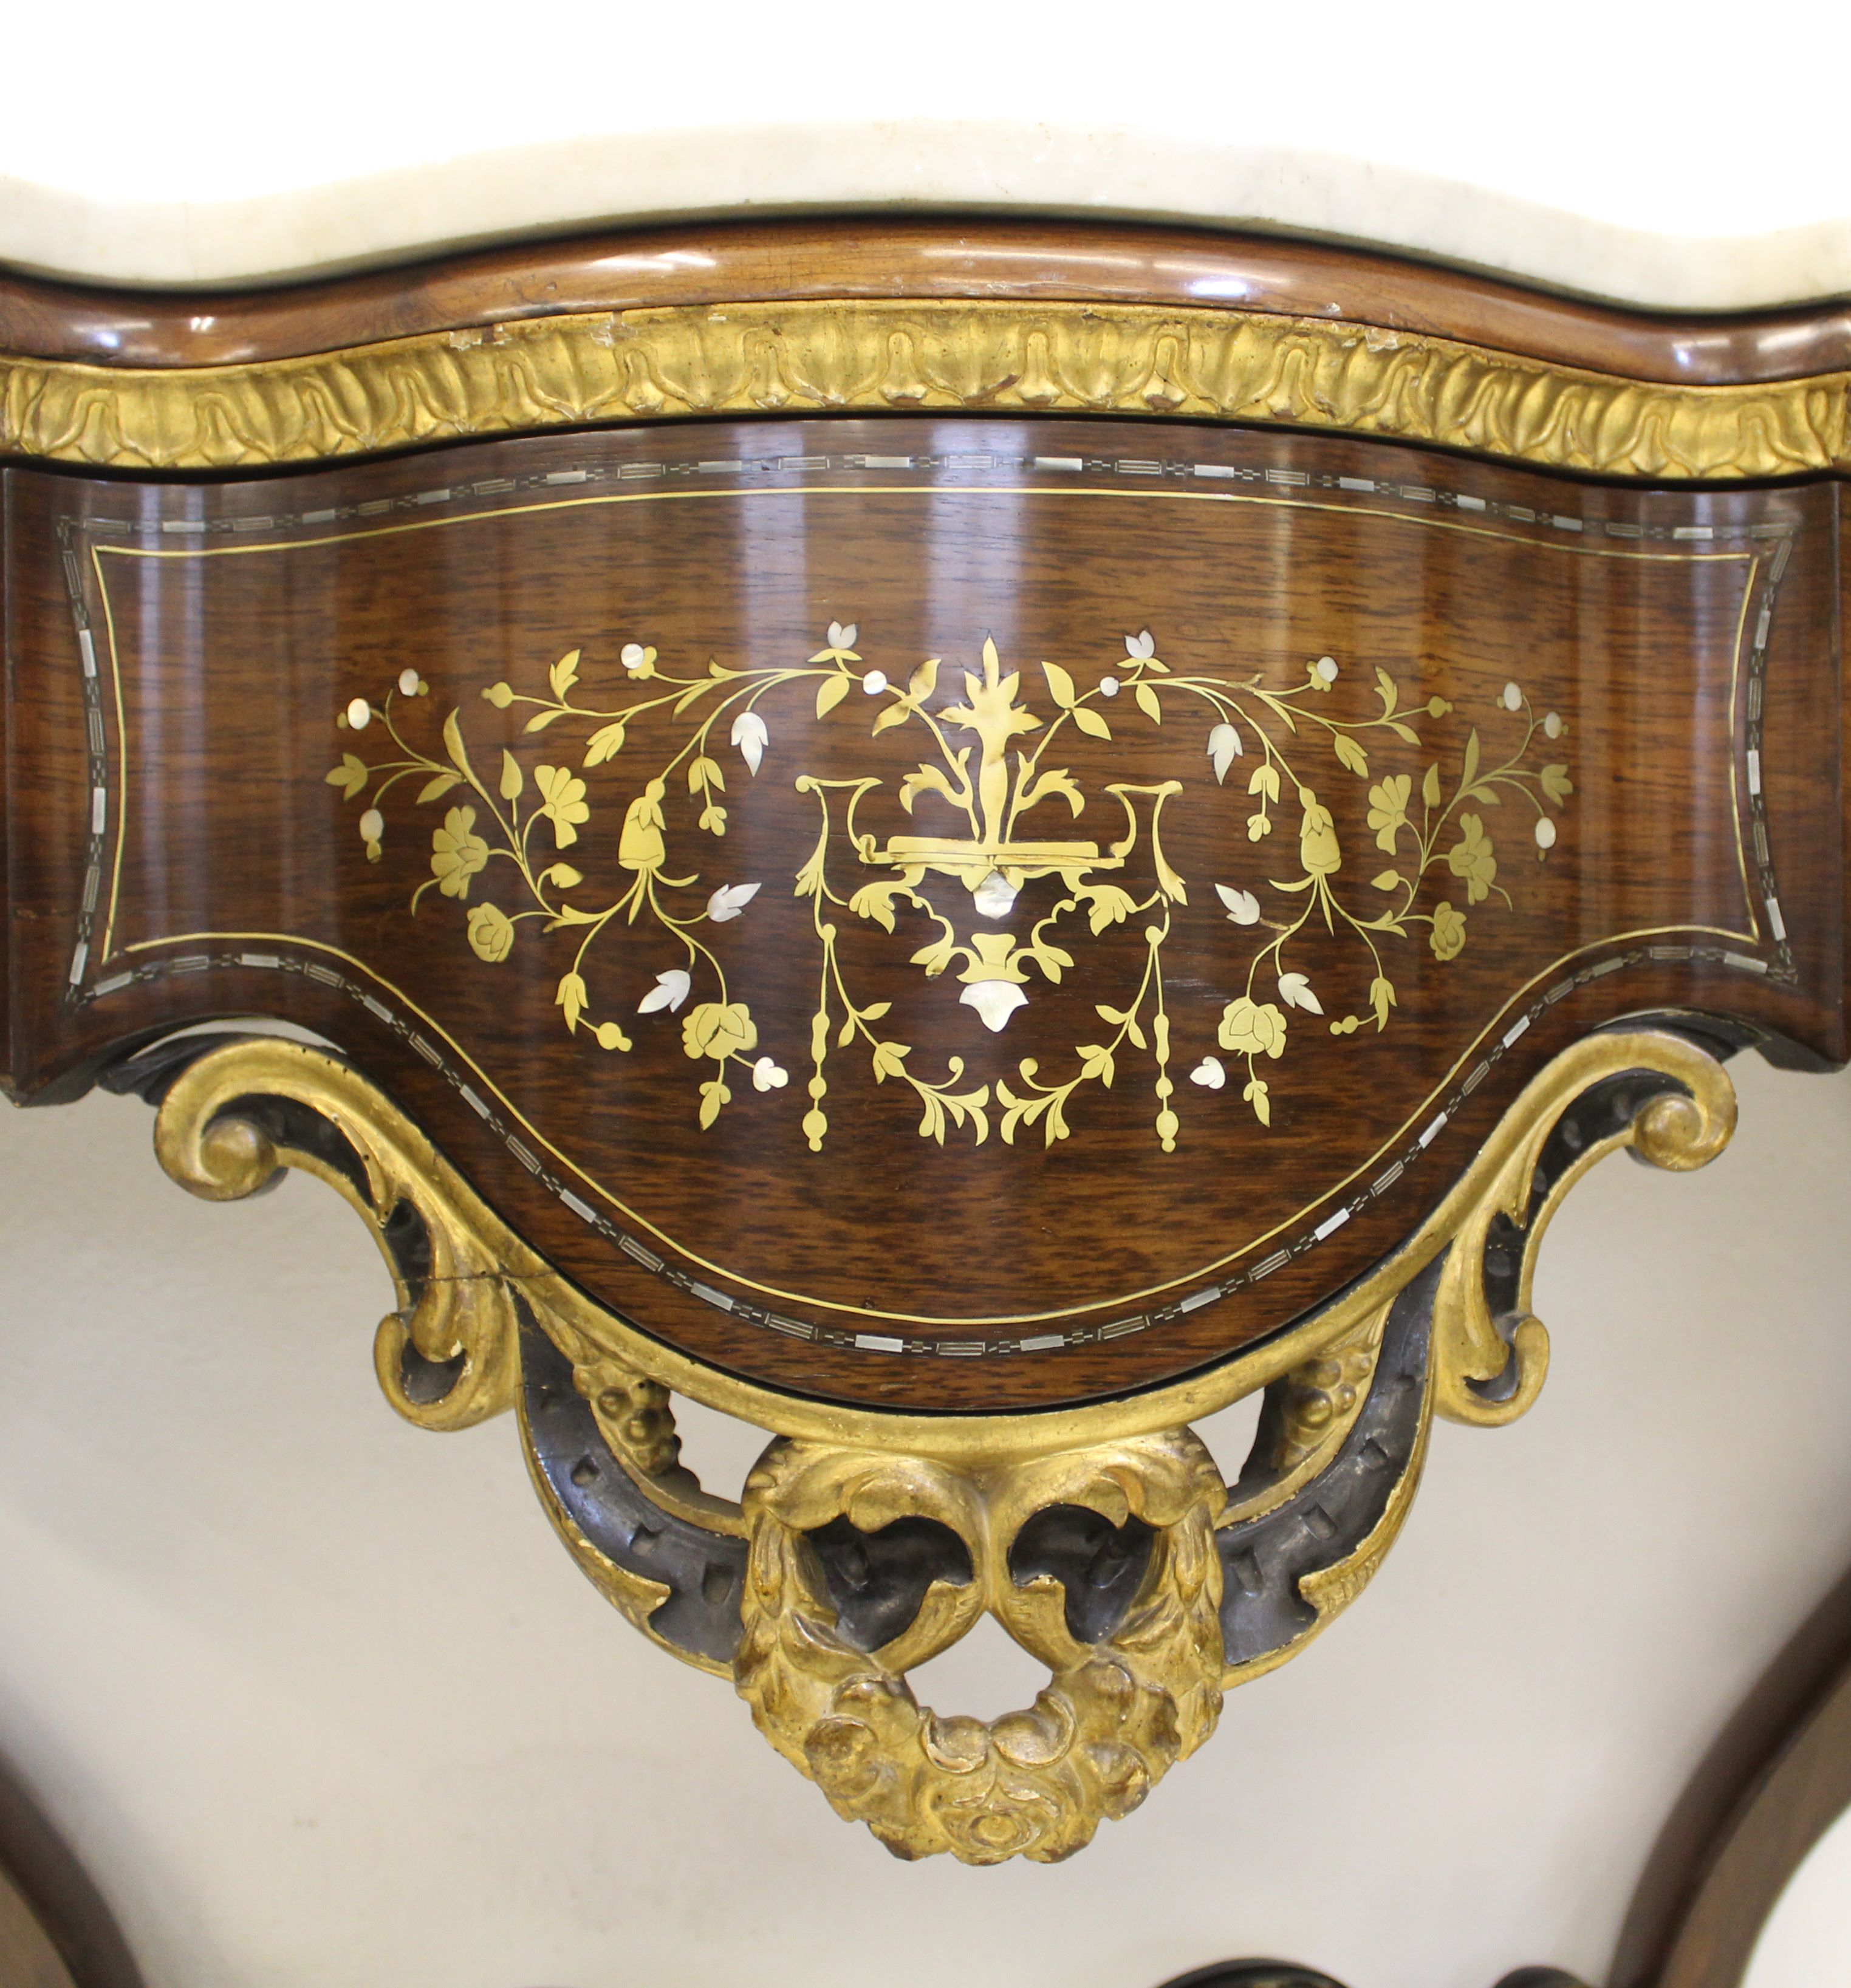 A fine and impressive large 19thC North European commode en console and mirror, c1820, possibly - Image 5 of 12